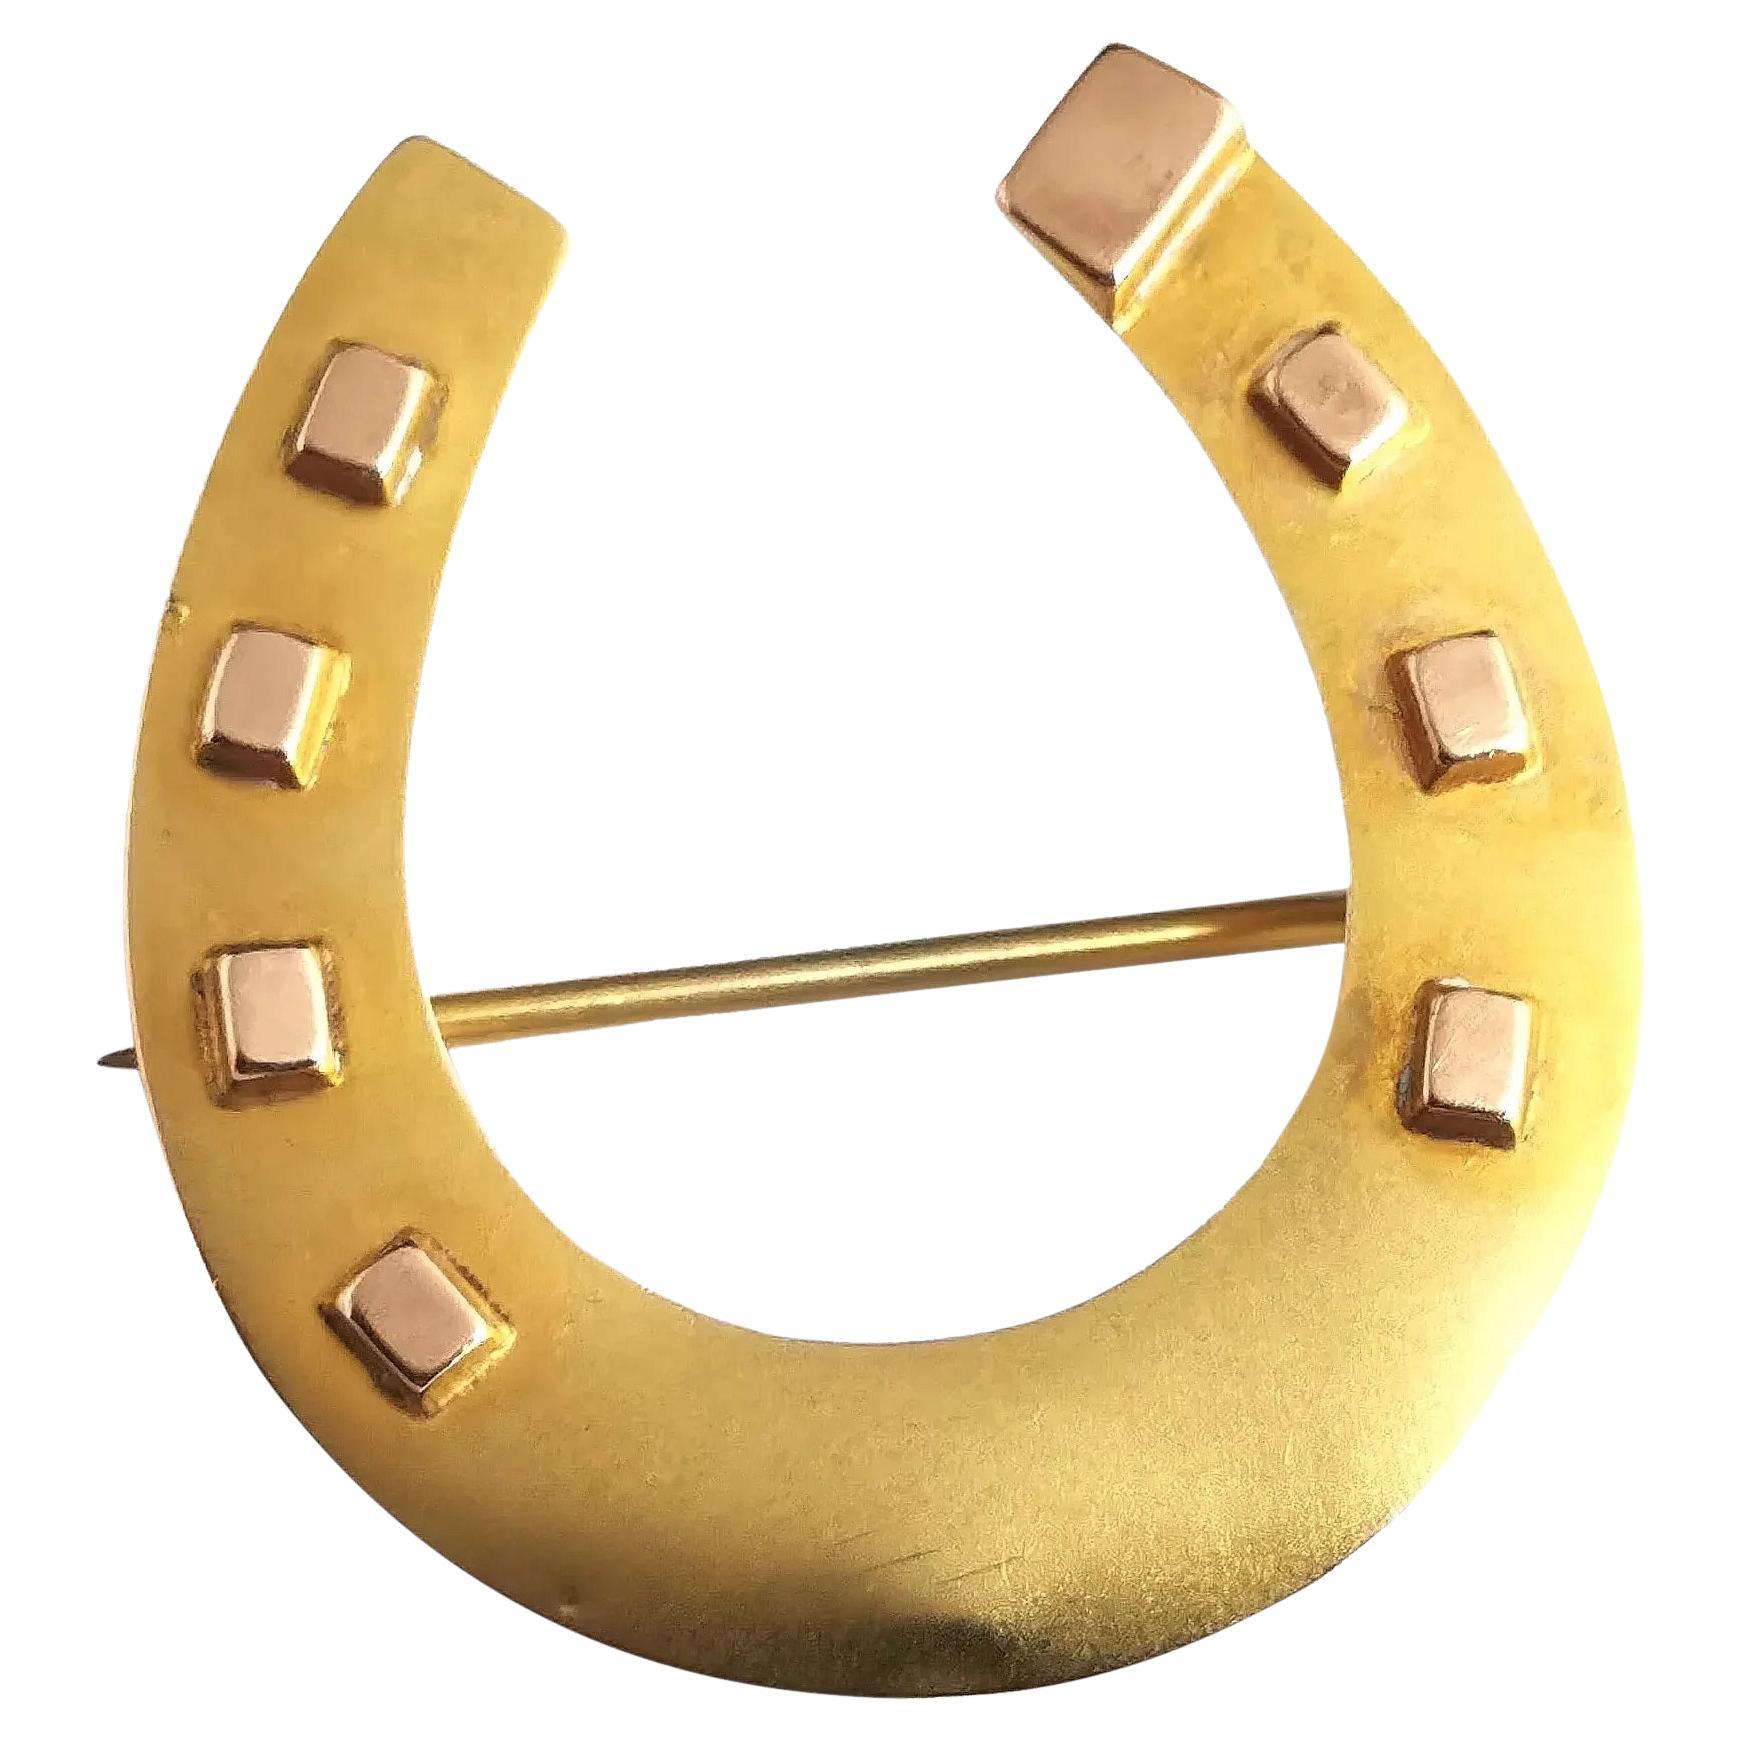 Antique 9k Yellow Gold Lucky Horseshoe Brooch, Victorian